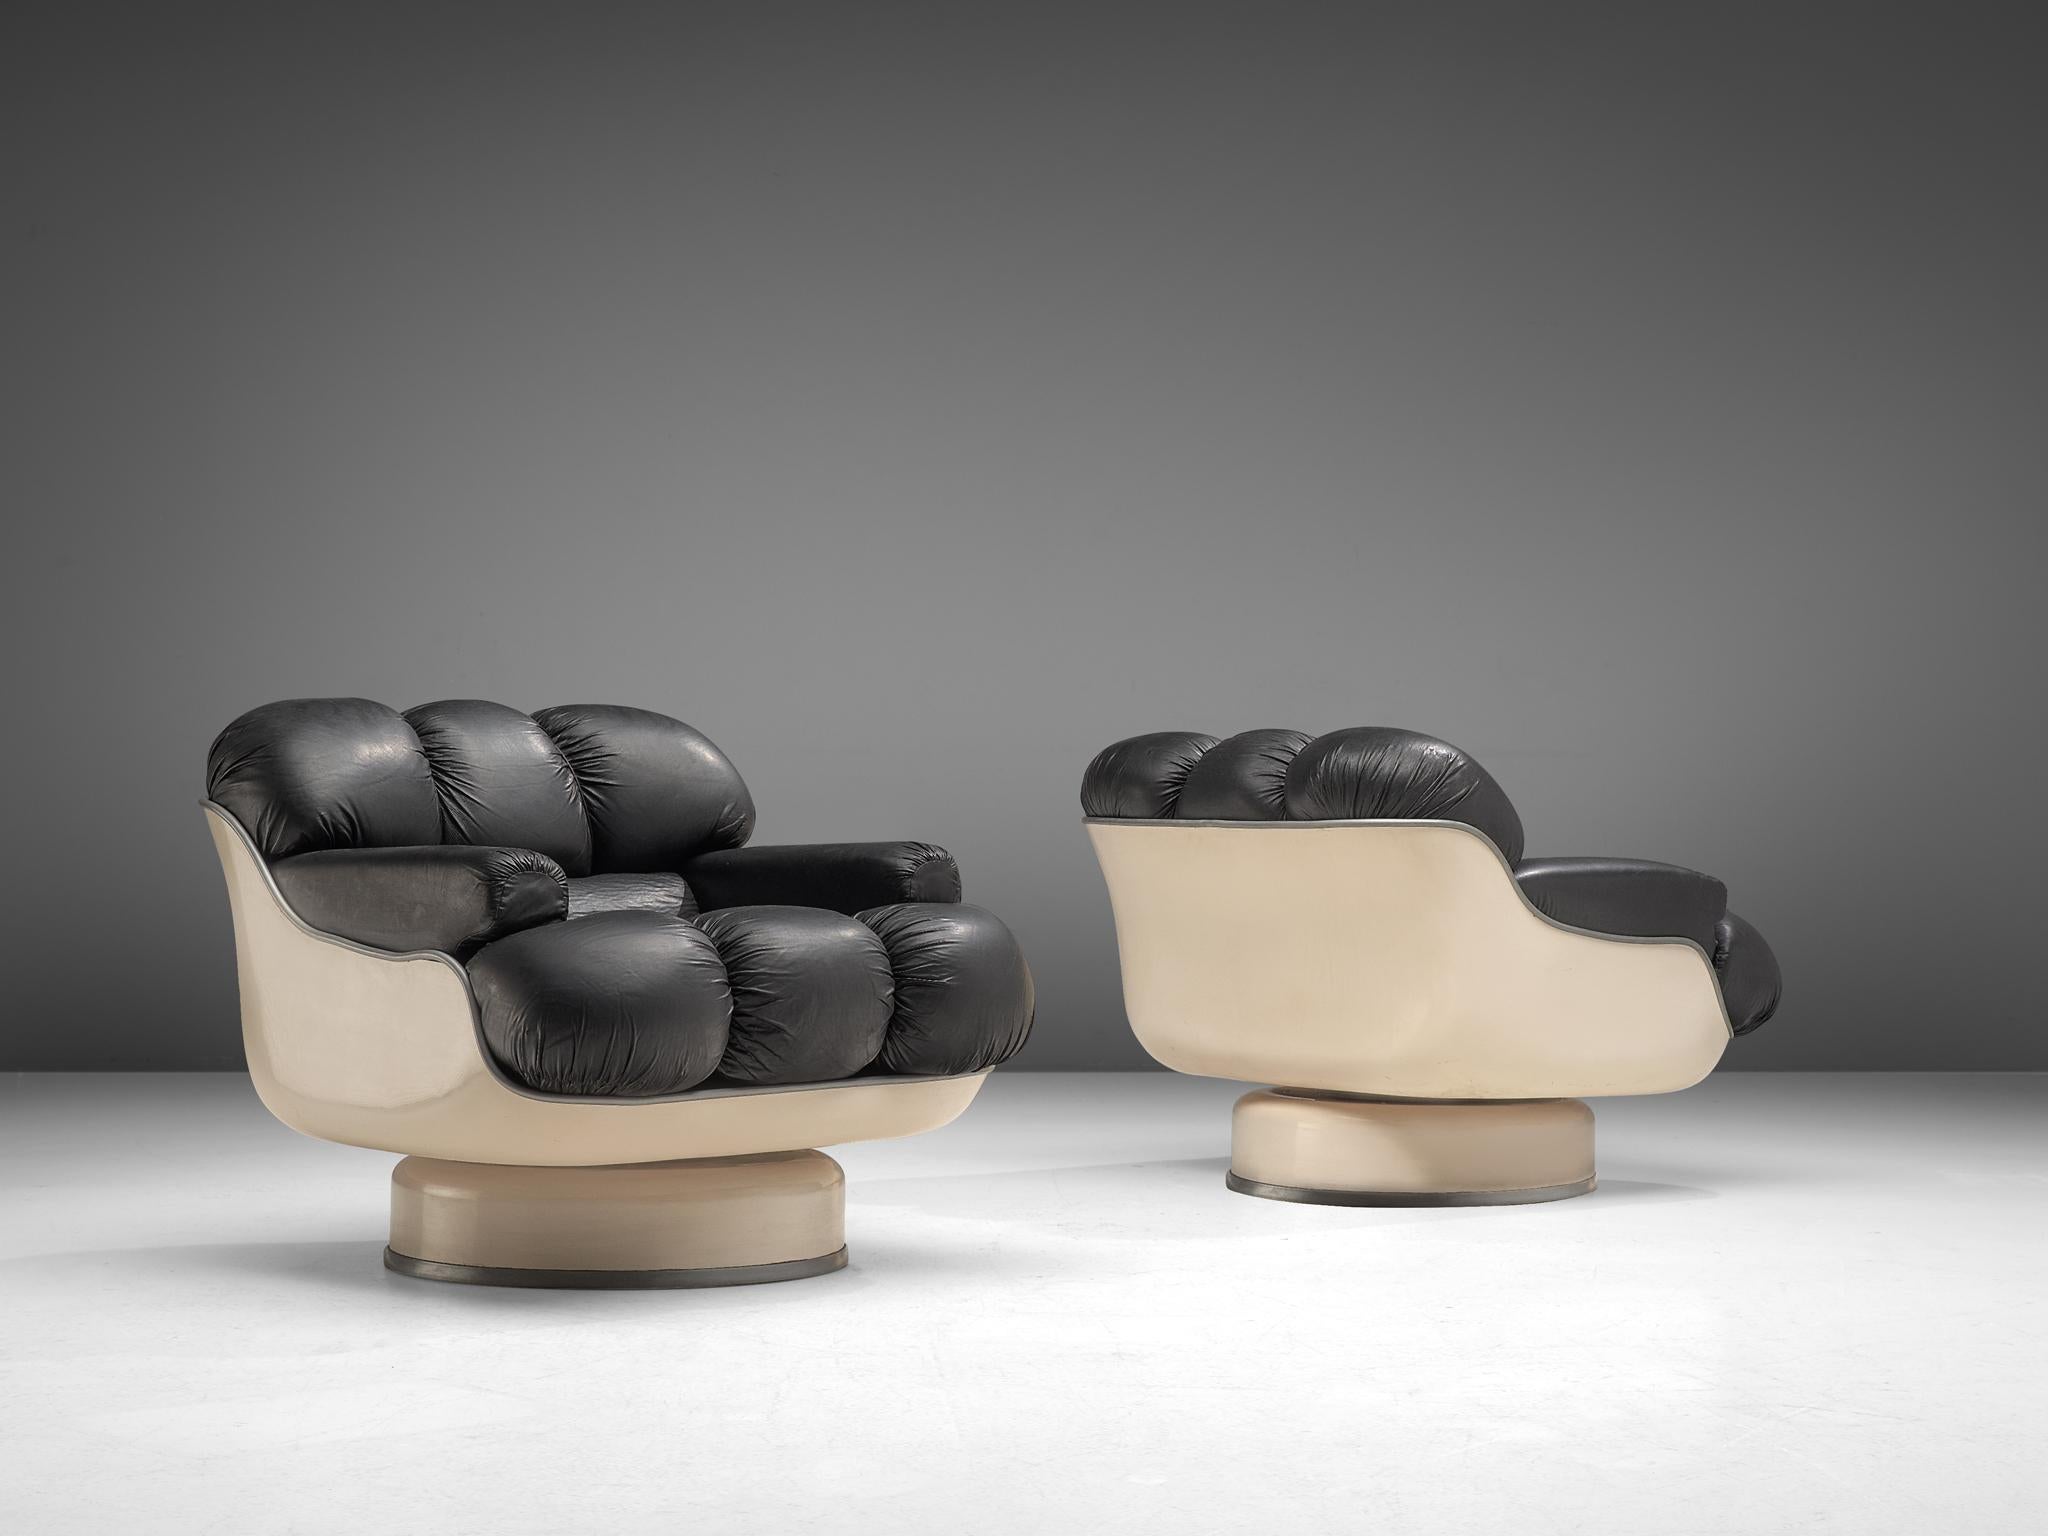 Set of lounge chairs in fiberglass and black leatherette, France, 1970s

This highly comfortable set of lounge chairs has a very soft and inviting appearance. The dark leatherette nicely contrasts to the off-white fiberglass shells. Both lounge